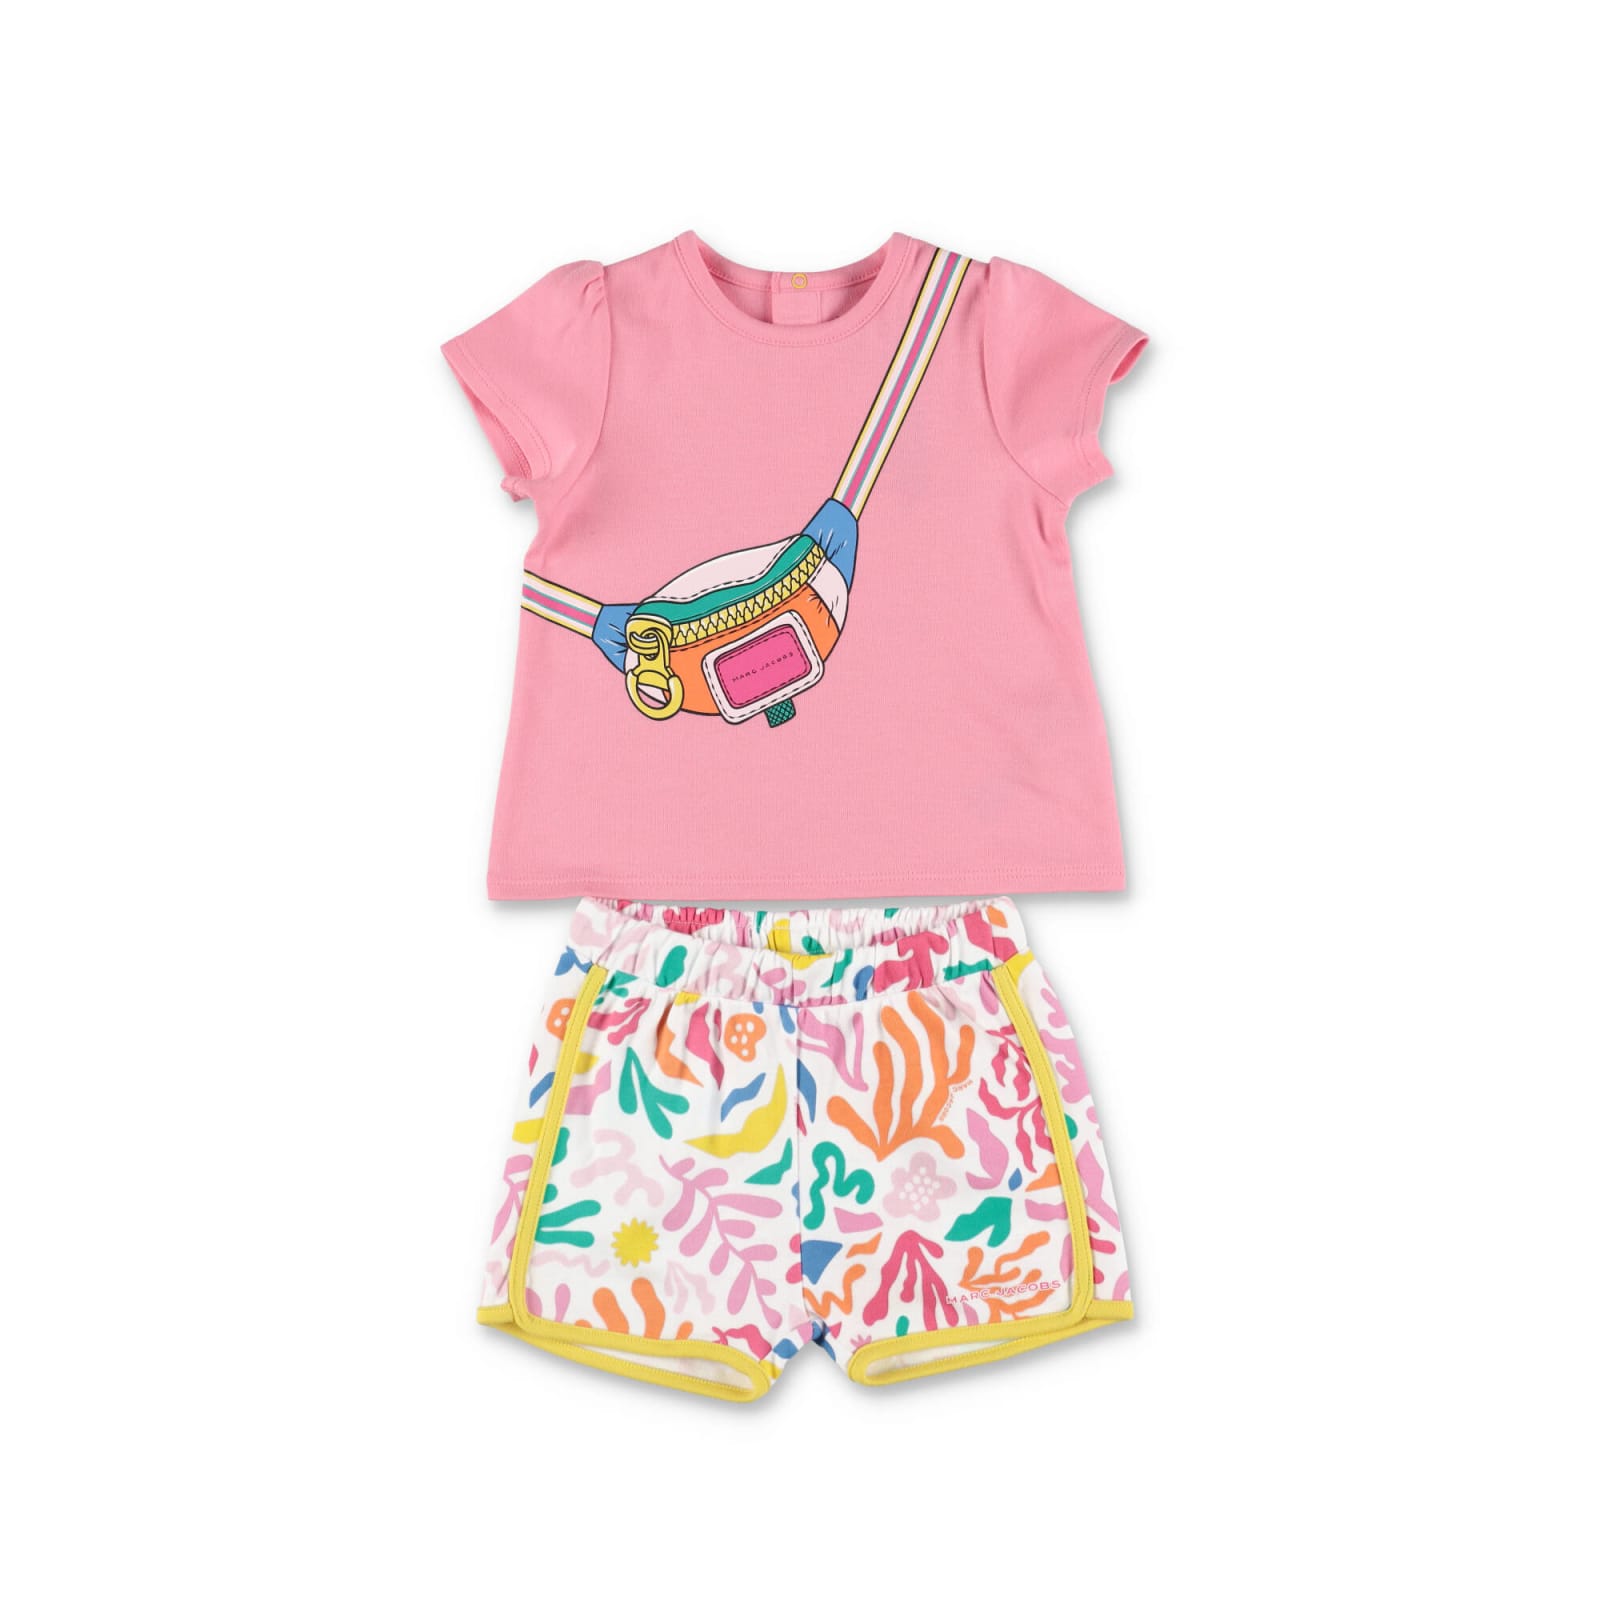 MARC JACOBS MARC JACOBS COMPLETO ROSA IN JERSEY DI COTONE CON T-SHIRT E SHORTS BABY GIRL